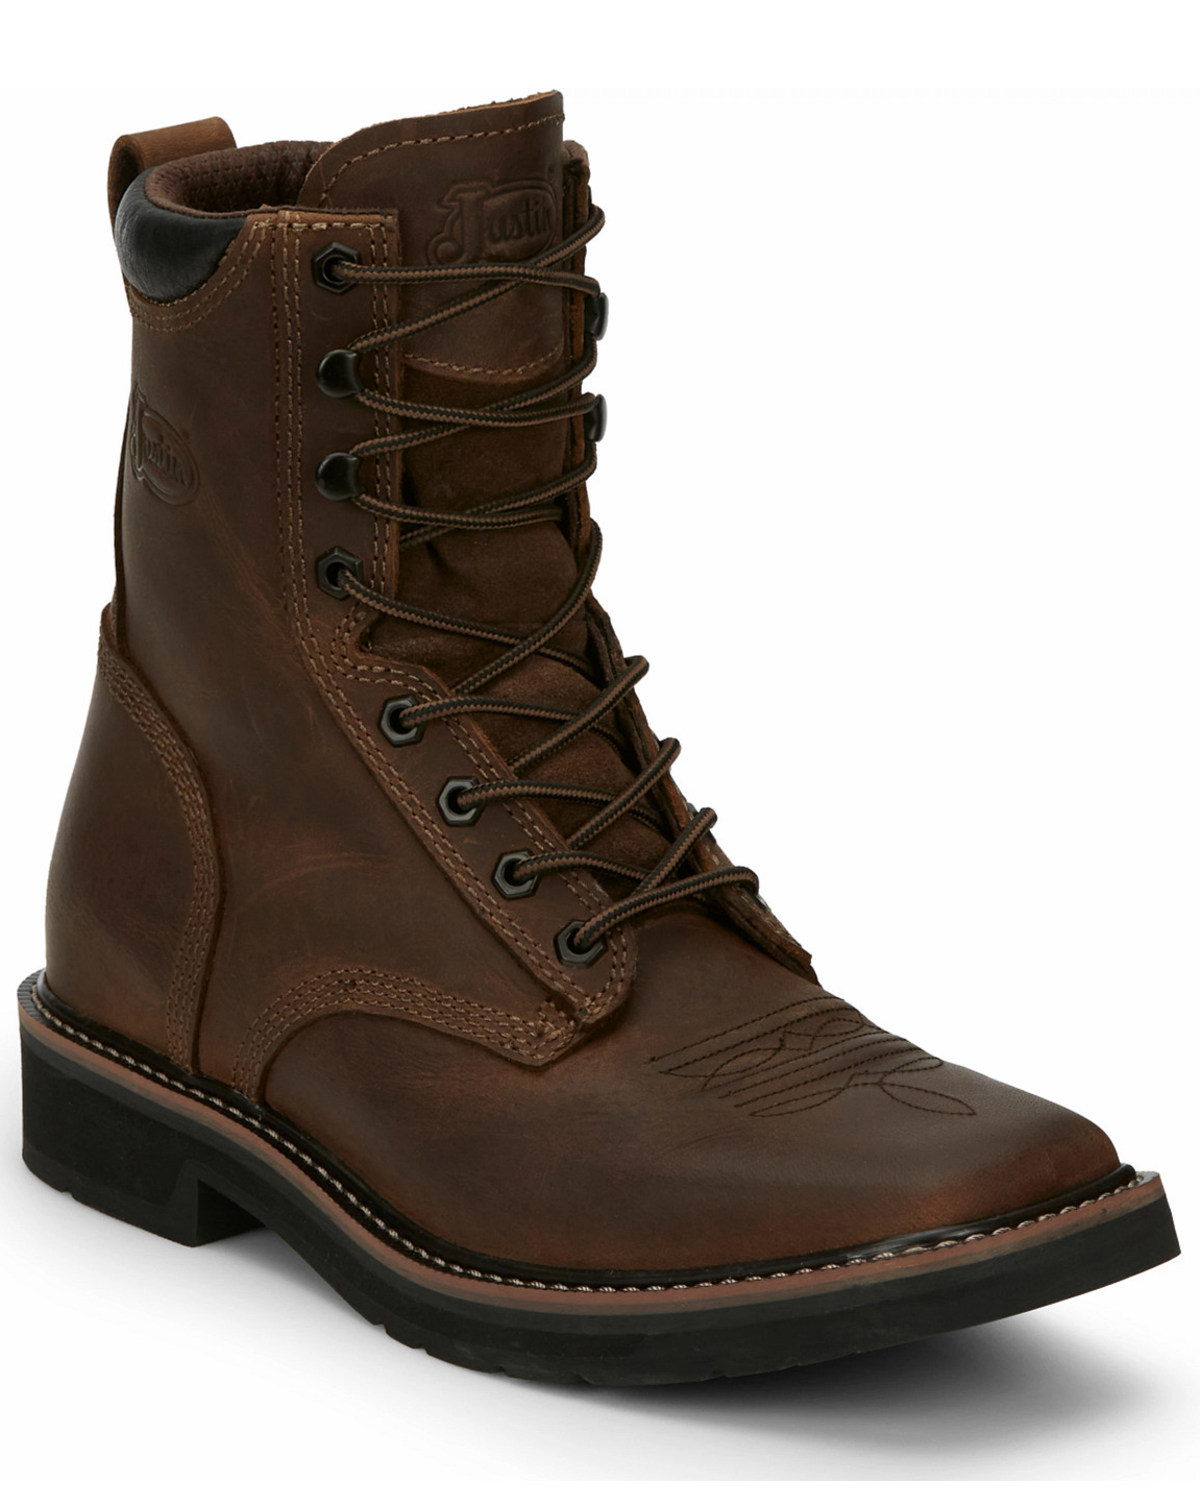 Justin Original Work Boots Men's Stampede Pull-On Square Toe Work Boot 